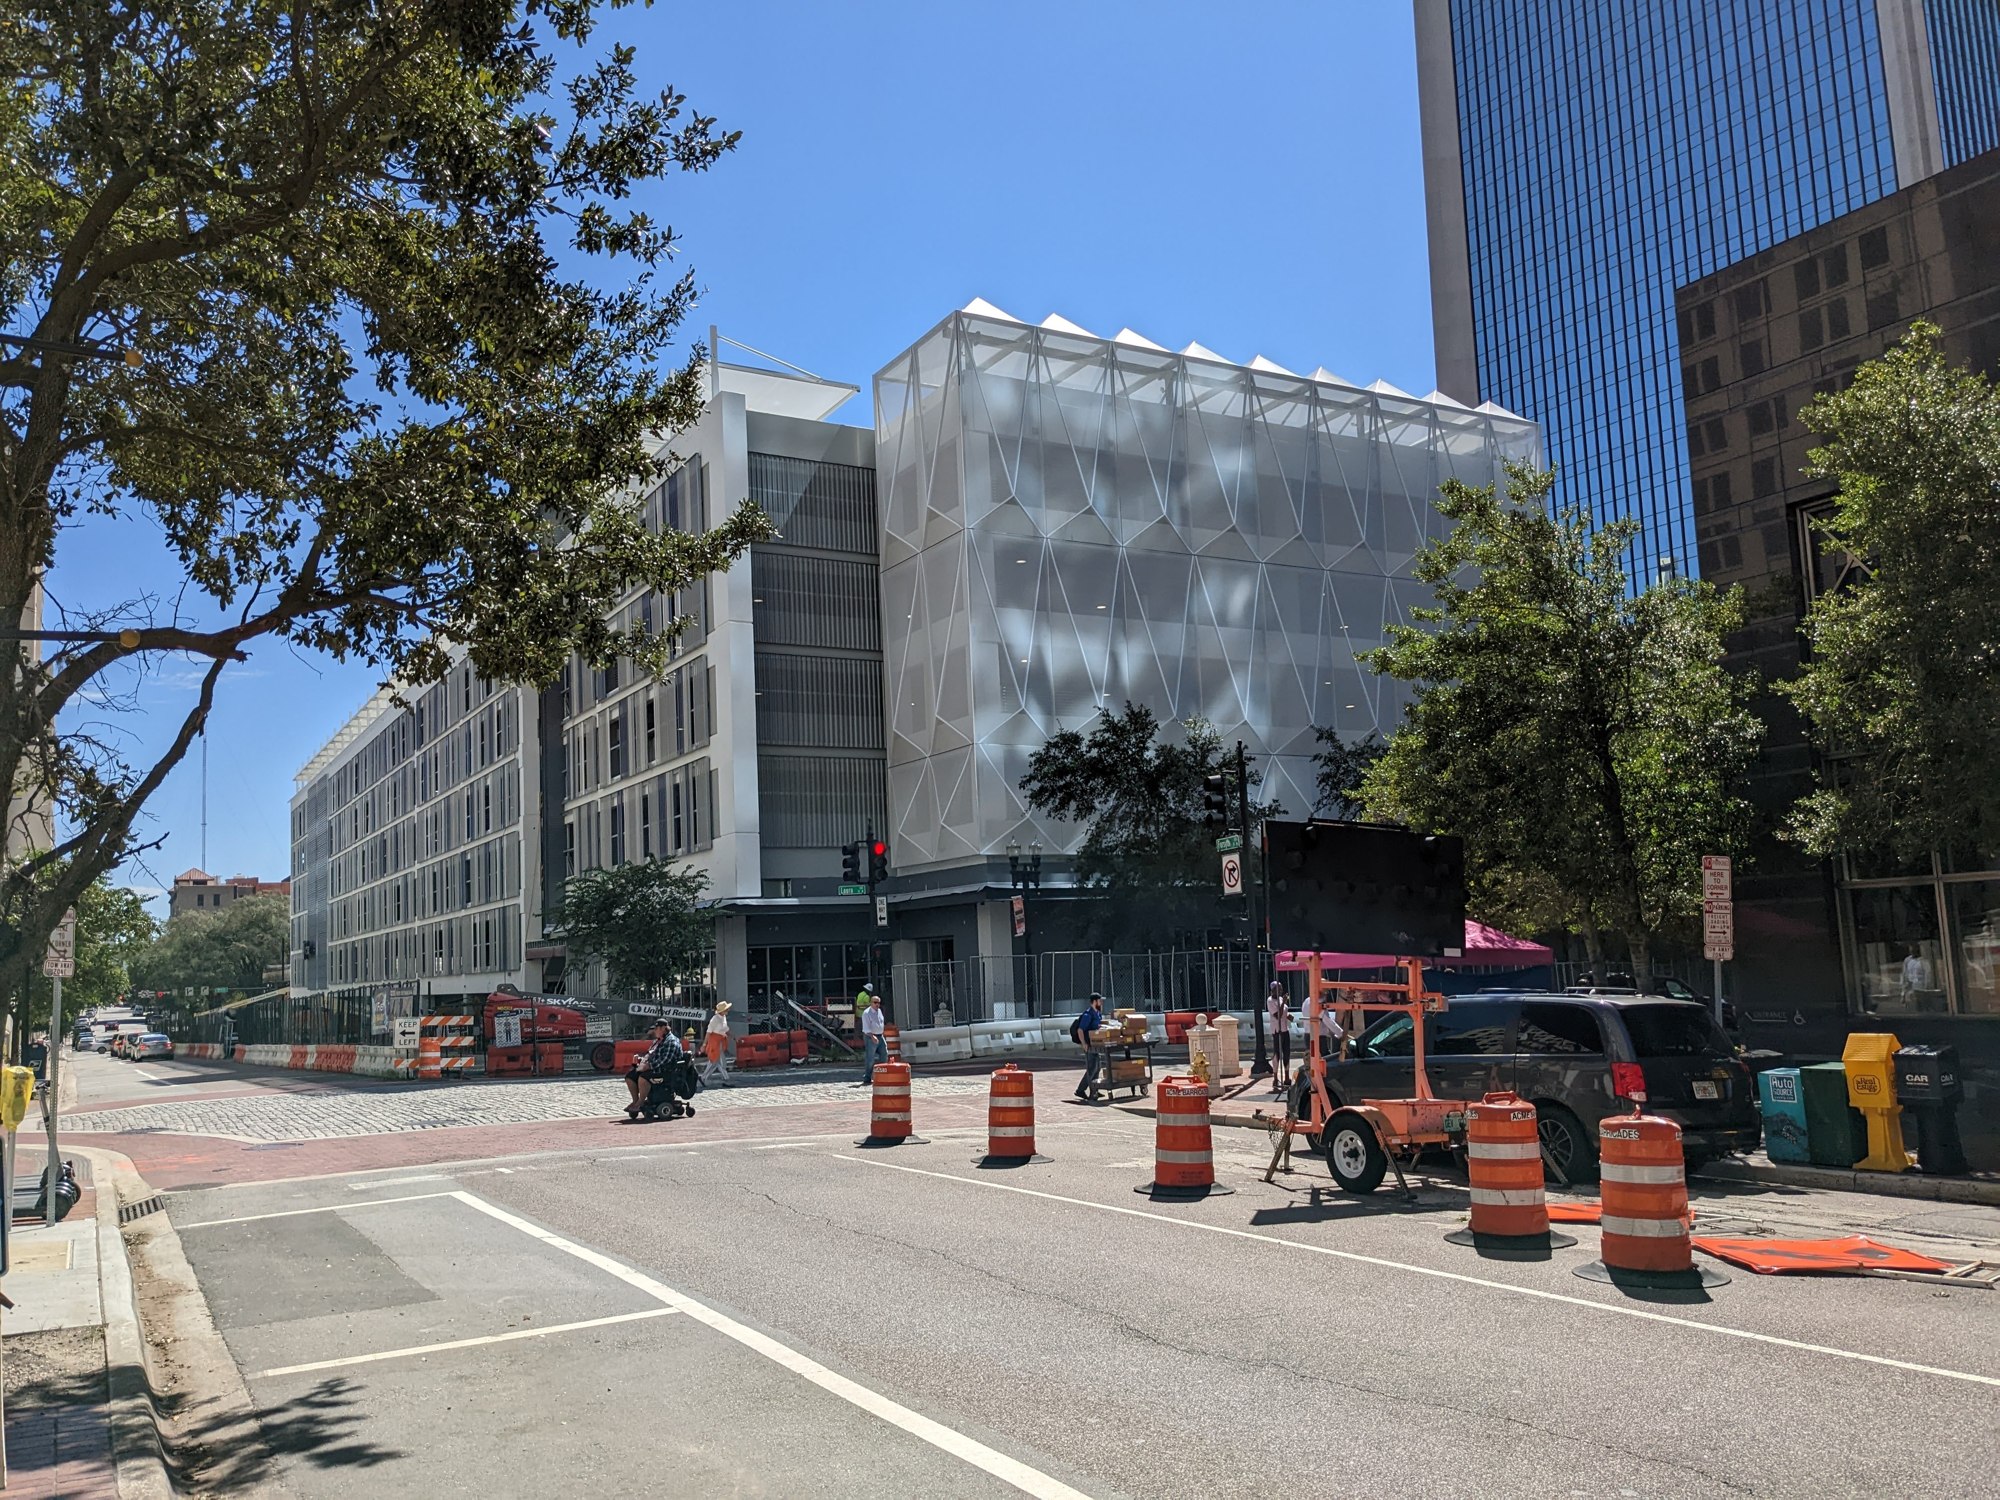 VyStar is building a $21 million, 807-space parking garage at 28 W. Forsyth St. Downtown that includes ground-floor retail space. It also will house the Jacksonville Children’s Chorus.